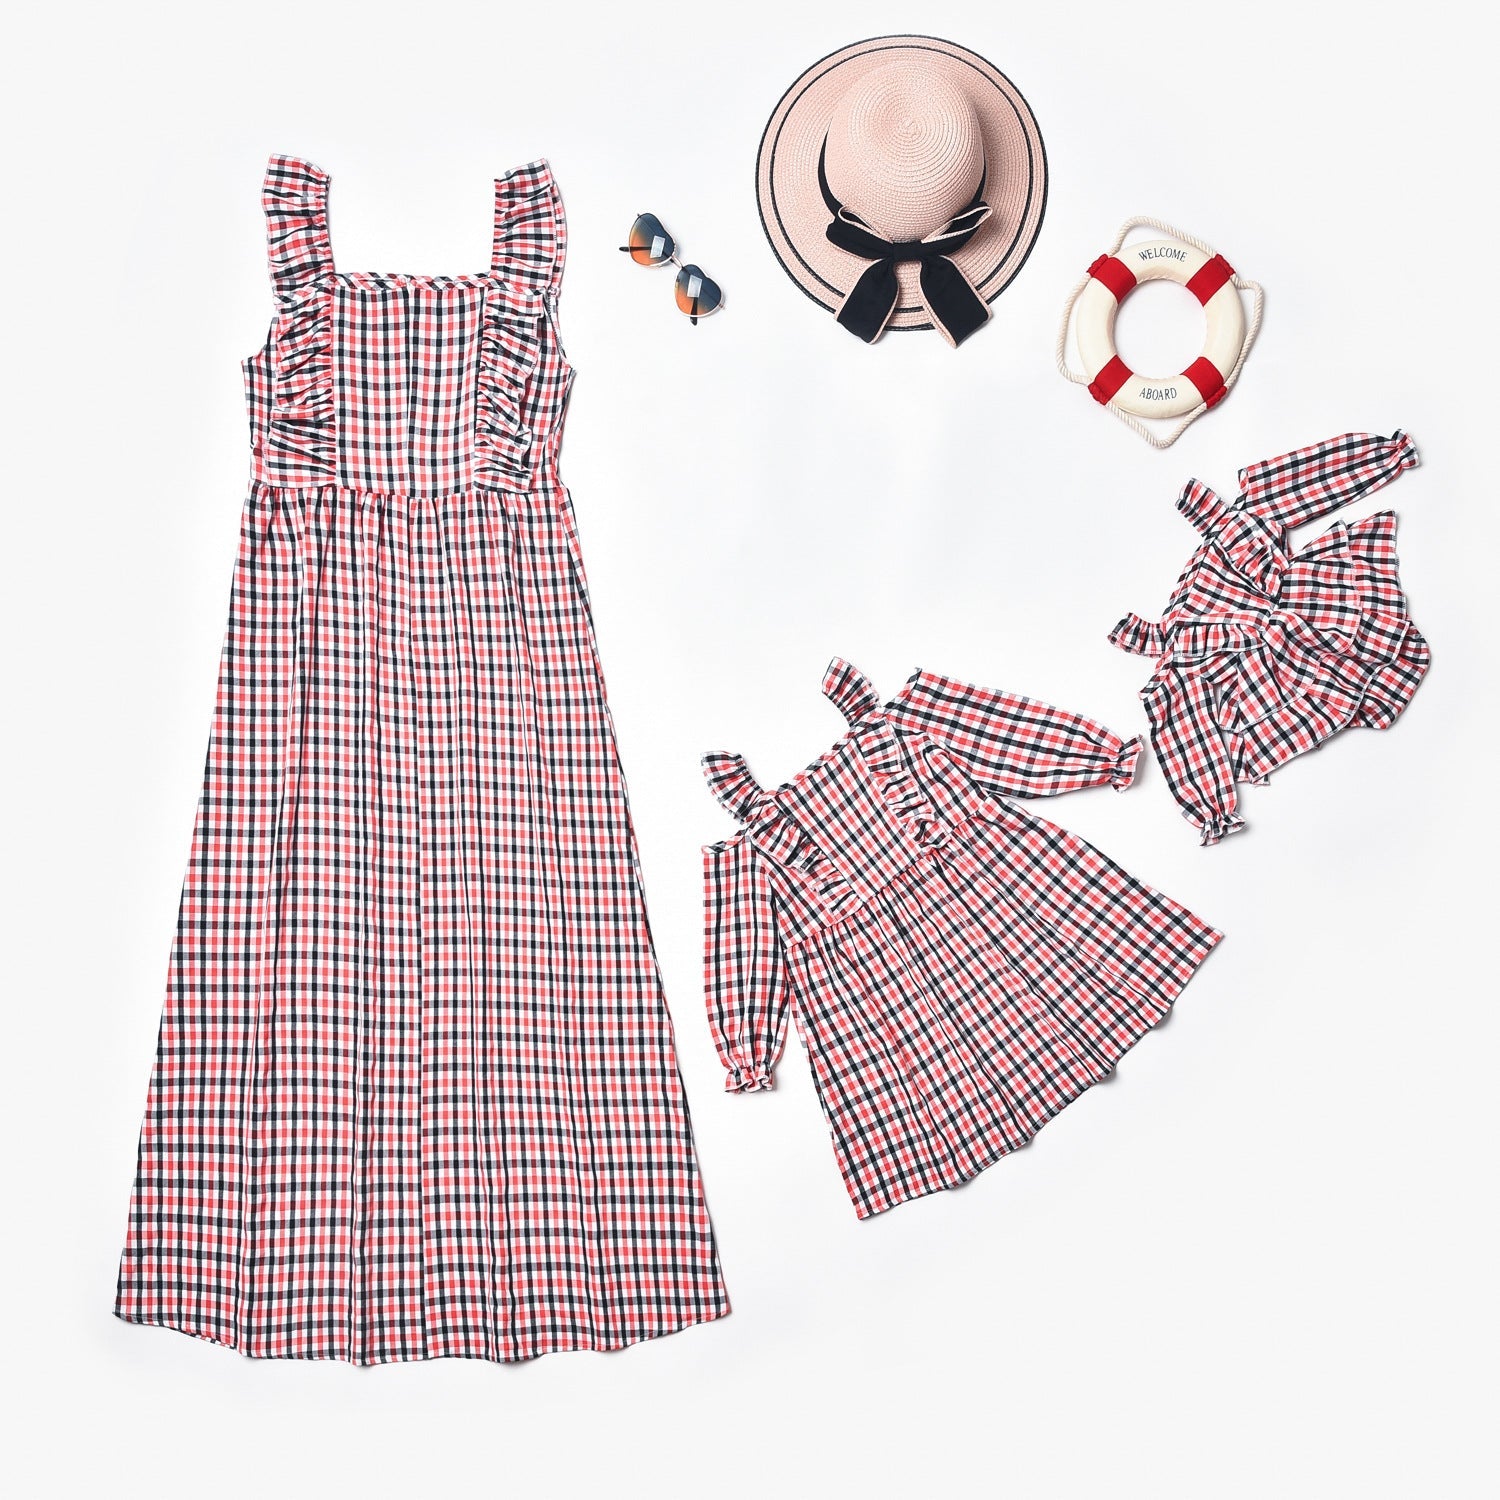 Plaid Print Ruffle Dress for Mommy and Girl